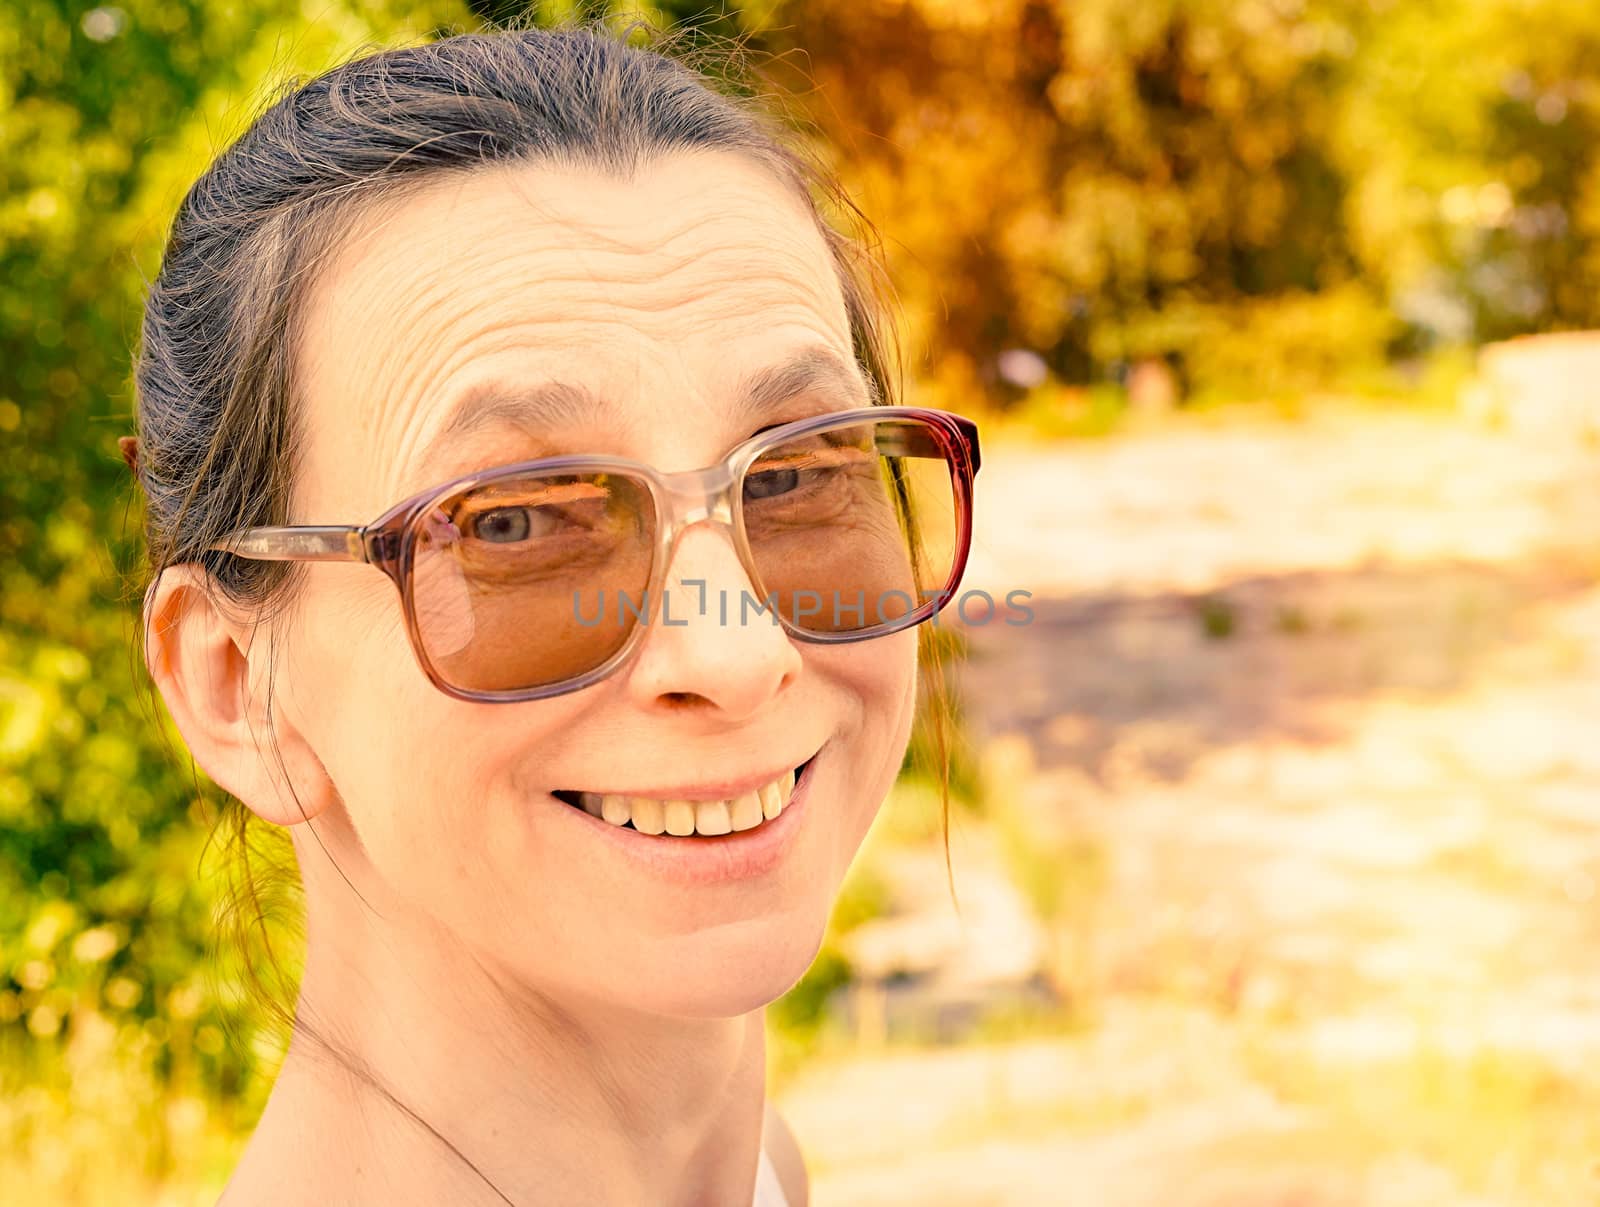 Snapshop of a smiling caucasian adult woman with large vintage sunglasses